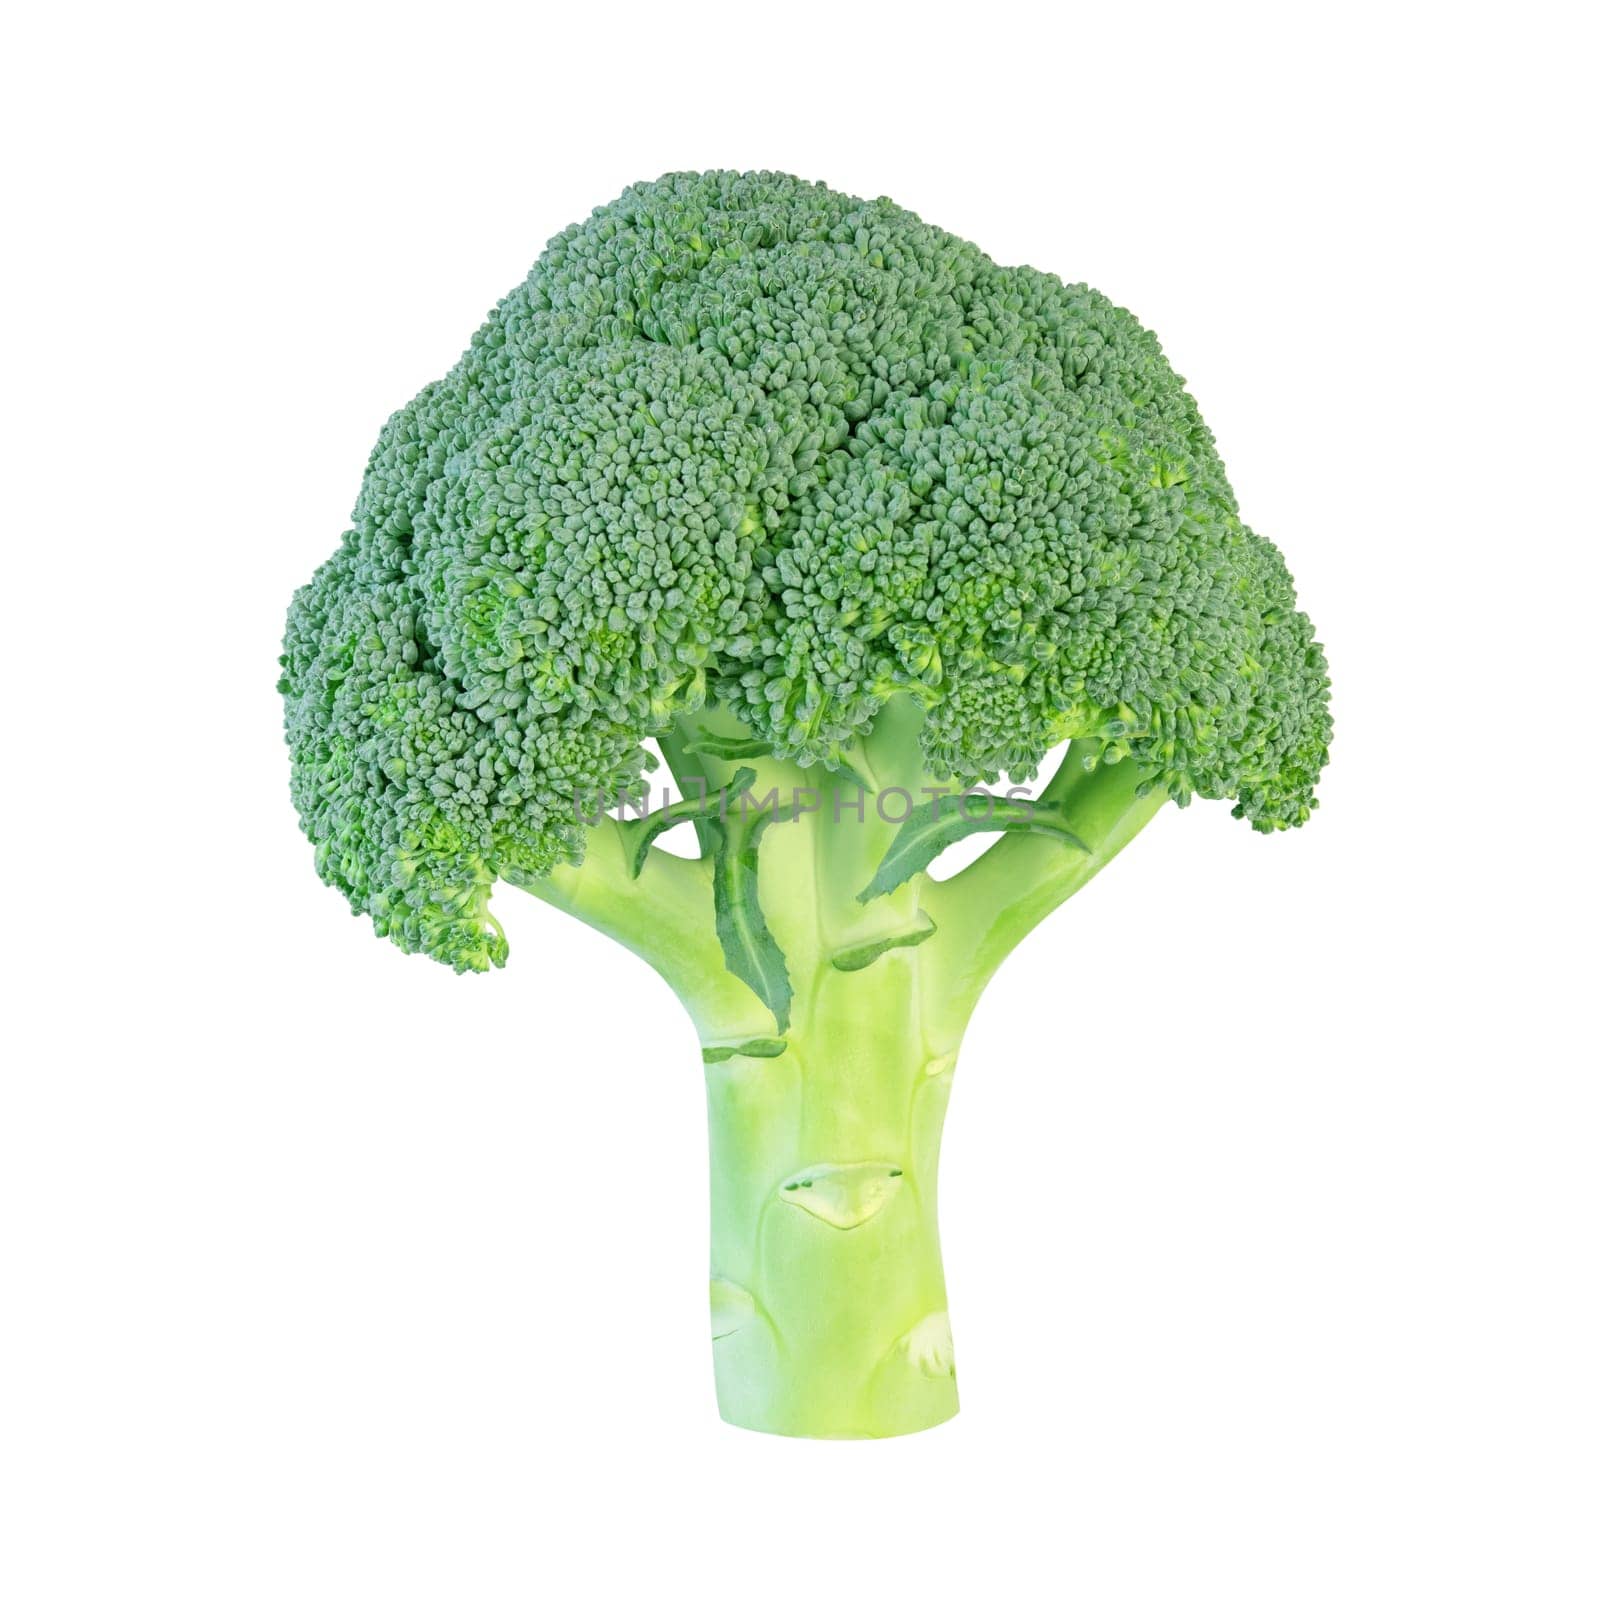 Perfect fresh broccoli cabbage isolated on a white background. Stock photography by anna_artist